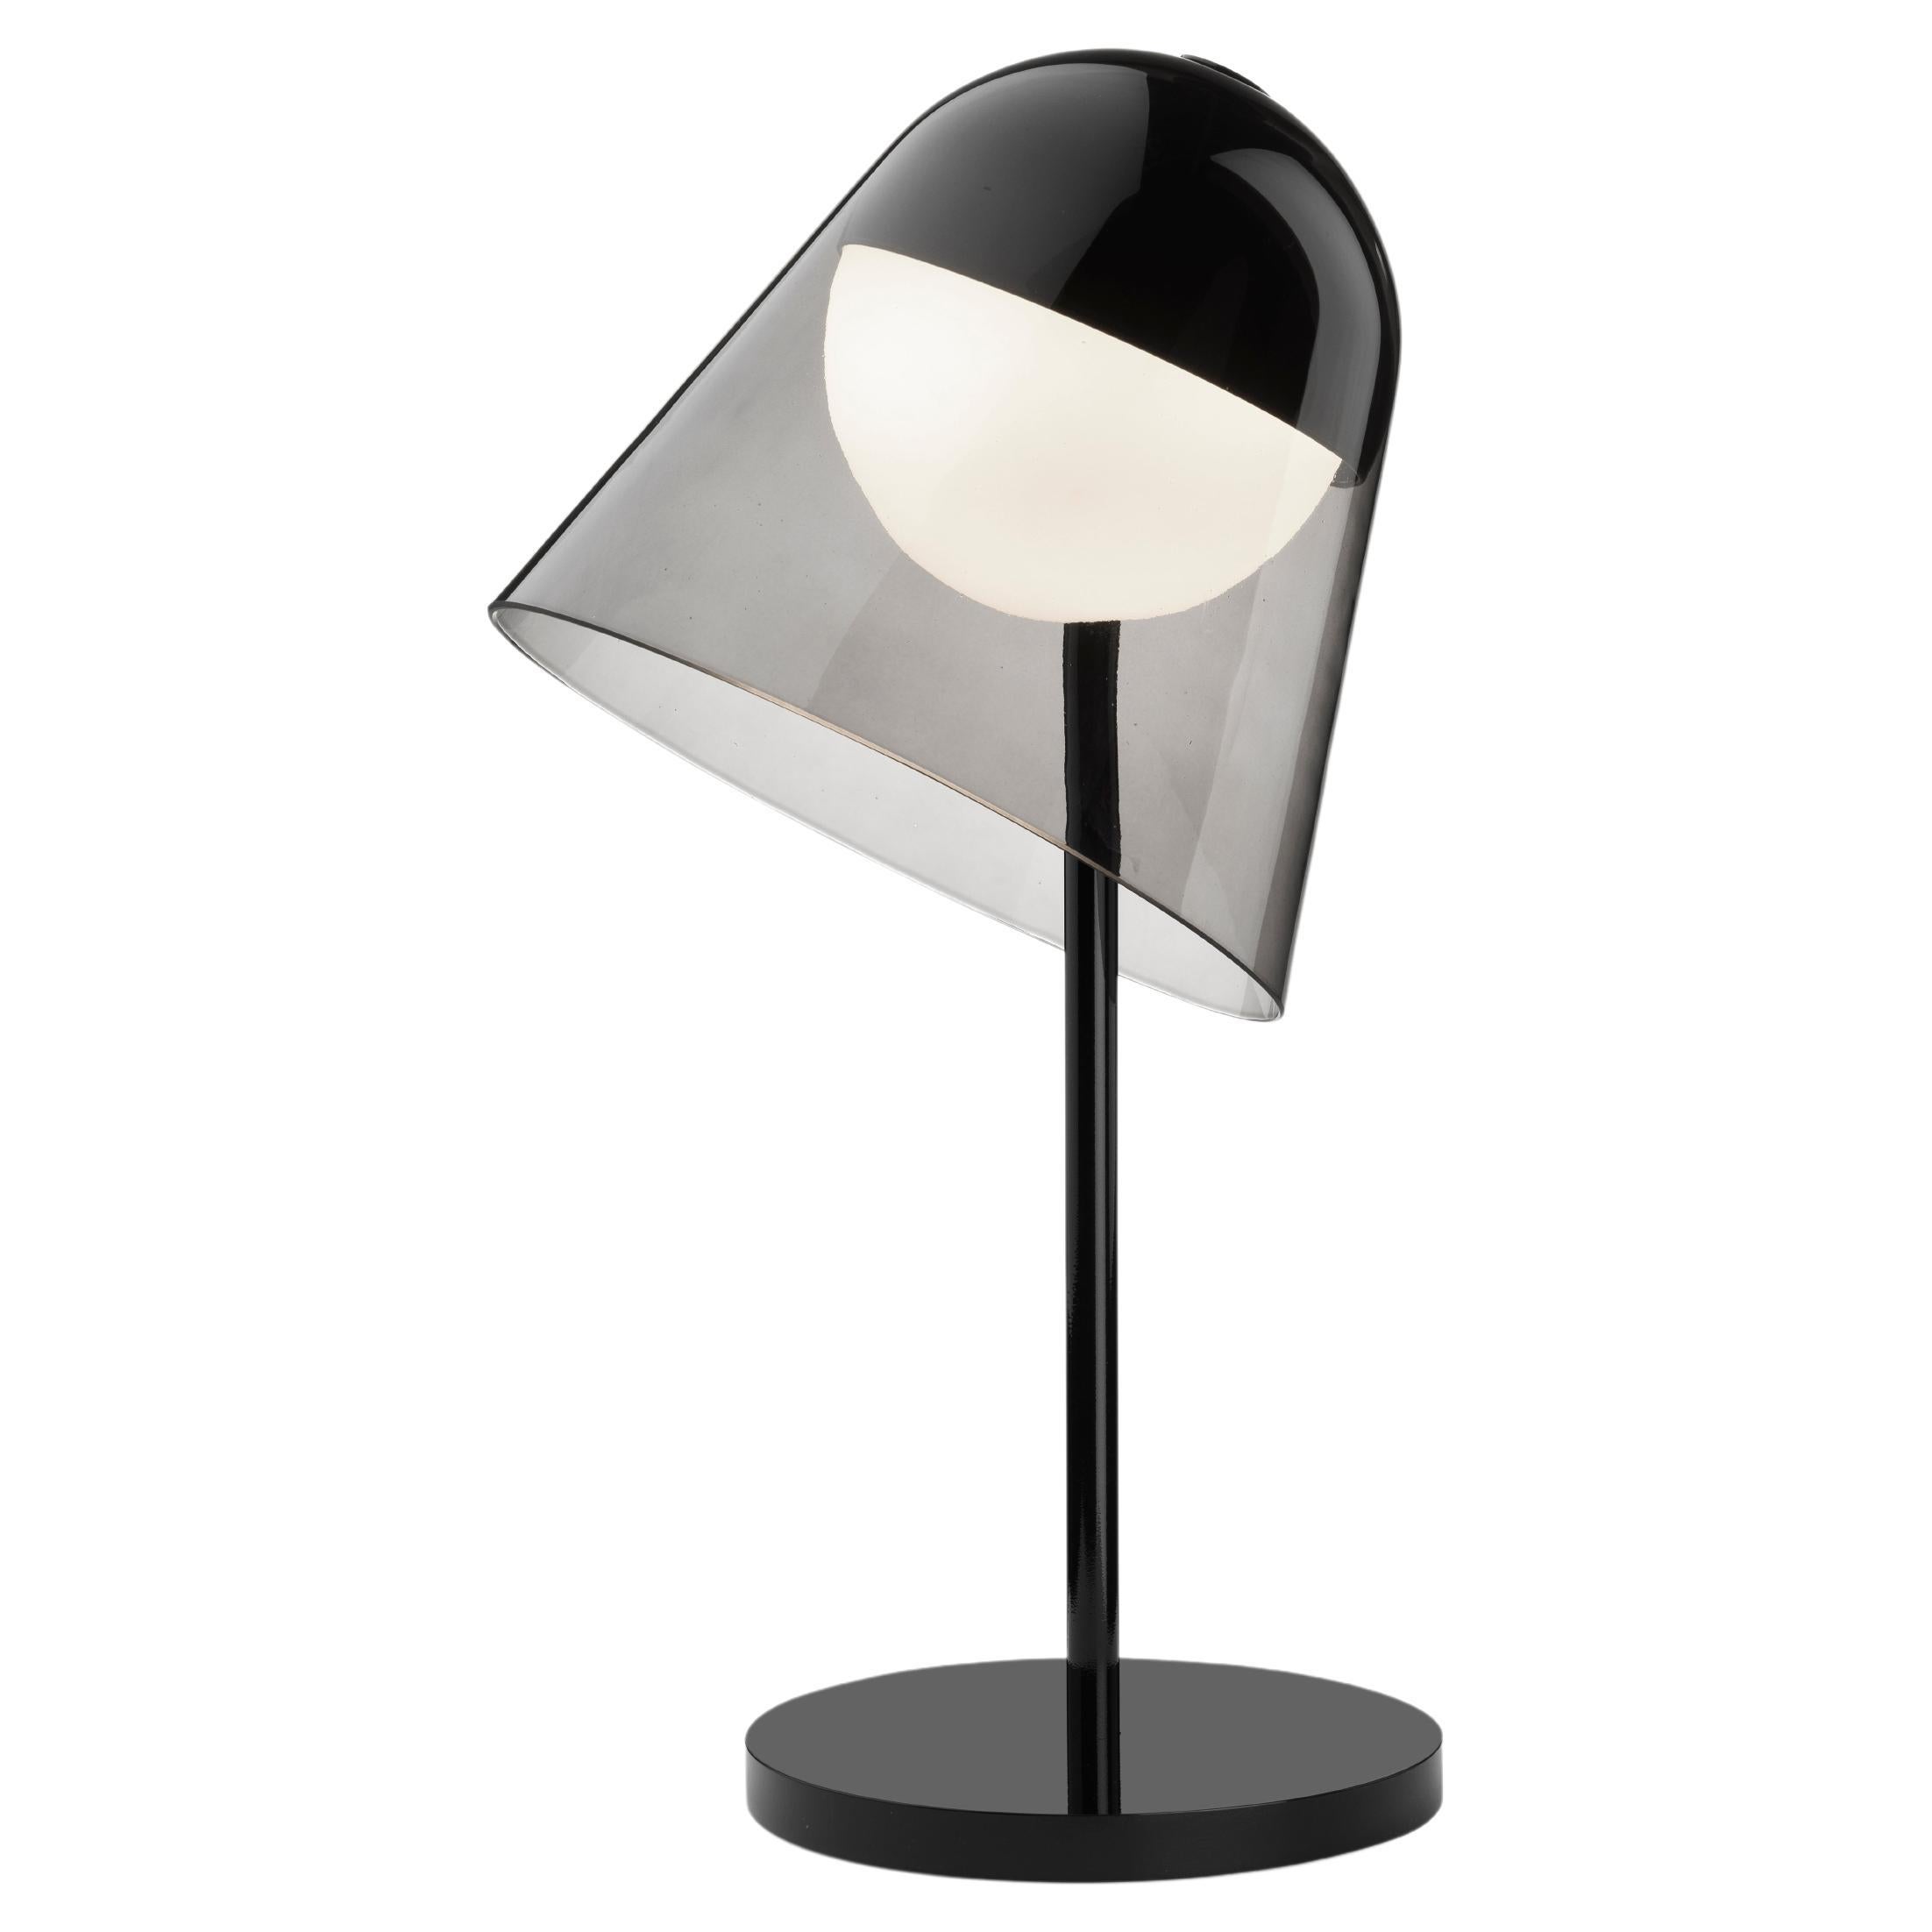 Helios Table Lamp, Smoked Glass and Black Structure, Made in Italy